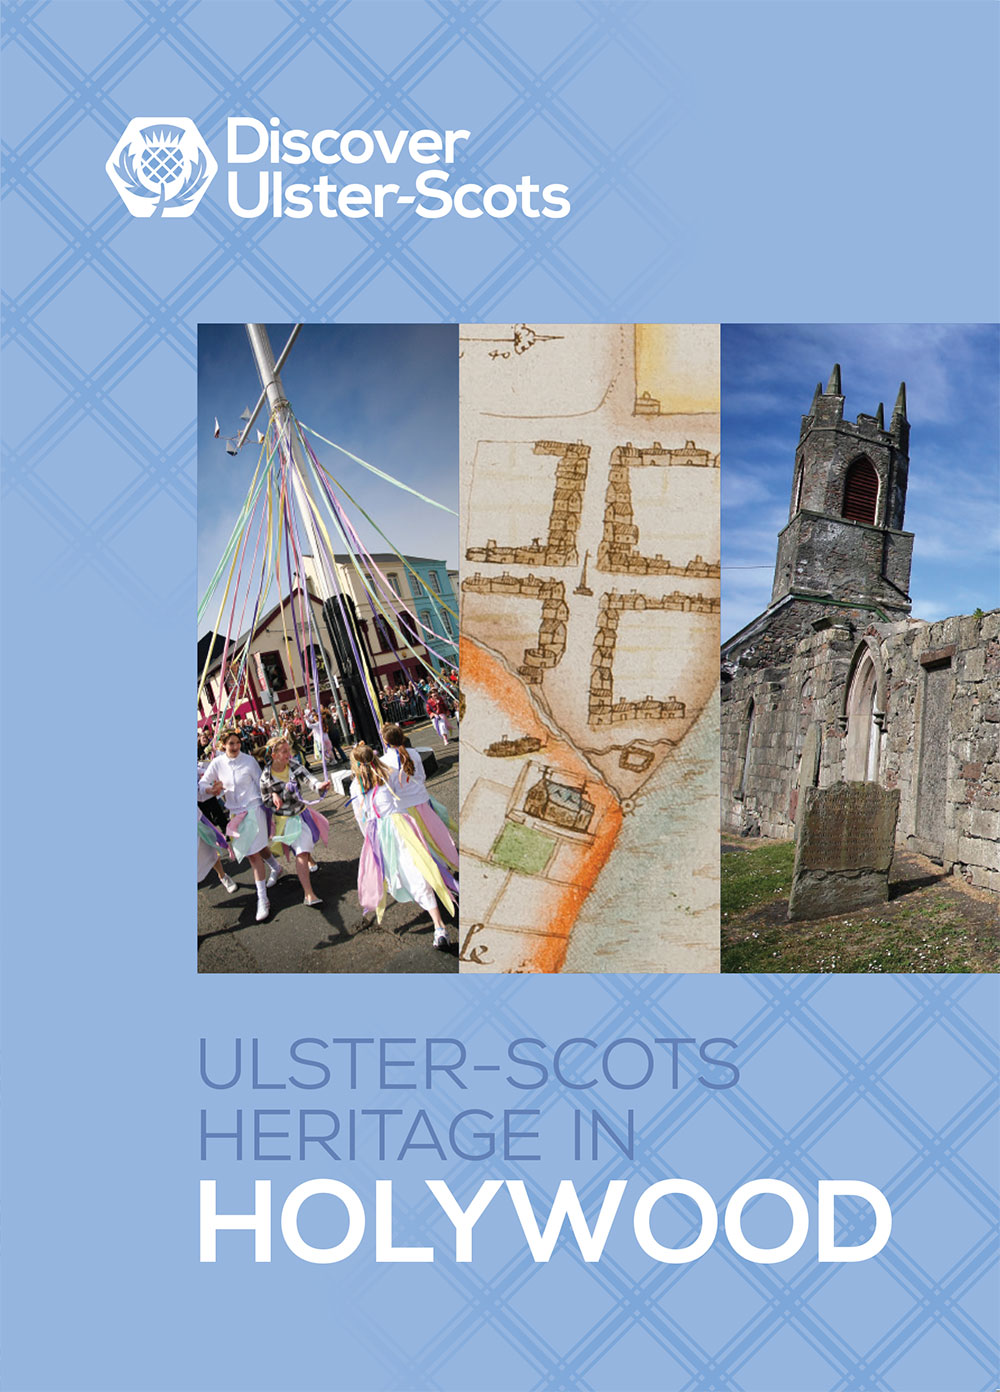 Ulster-Scots Heritage in Holywood